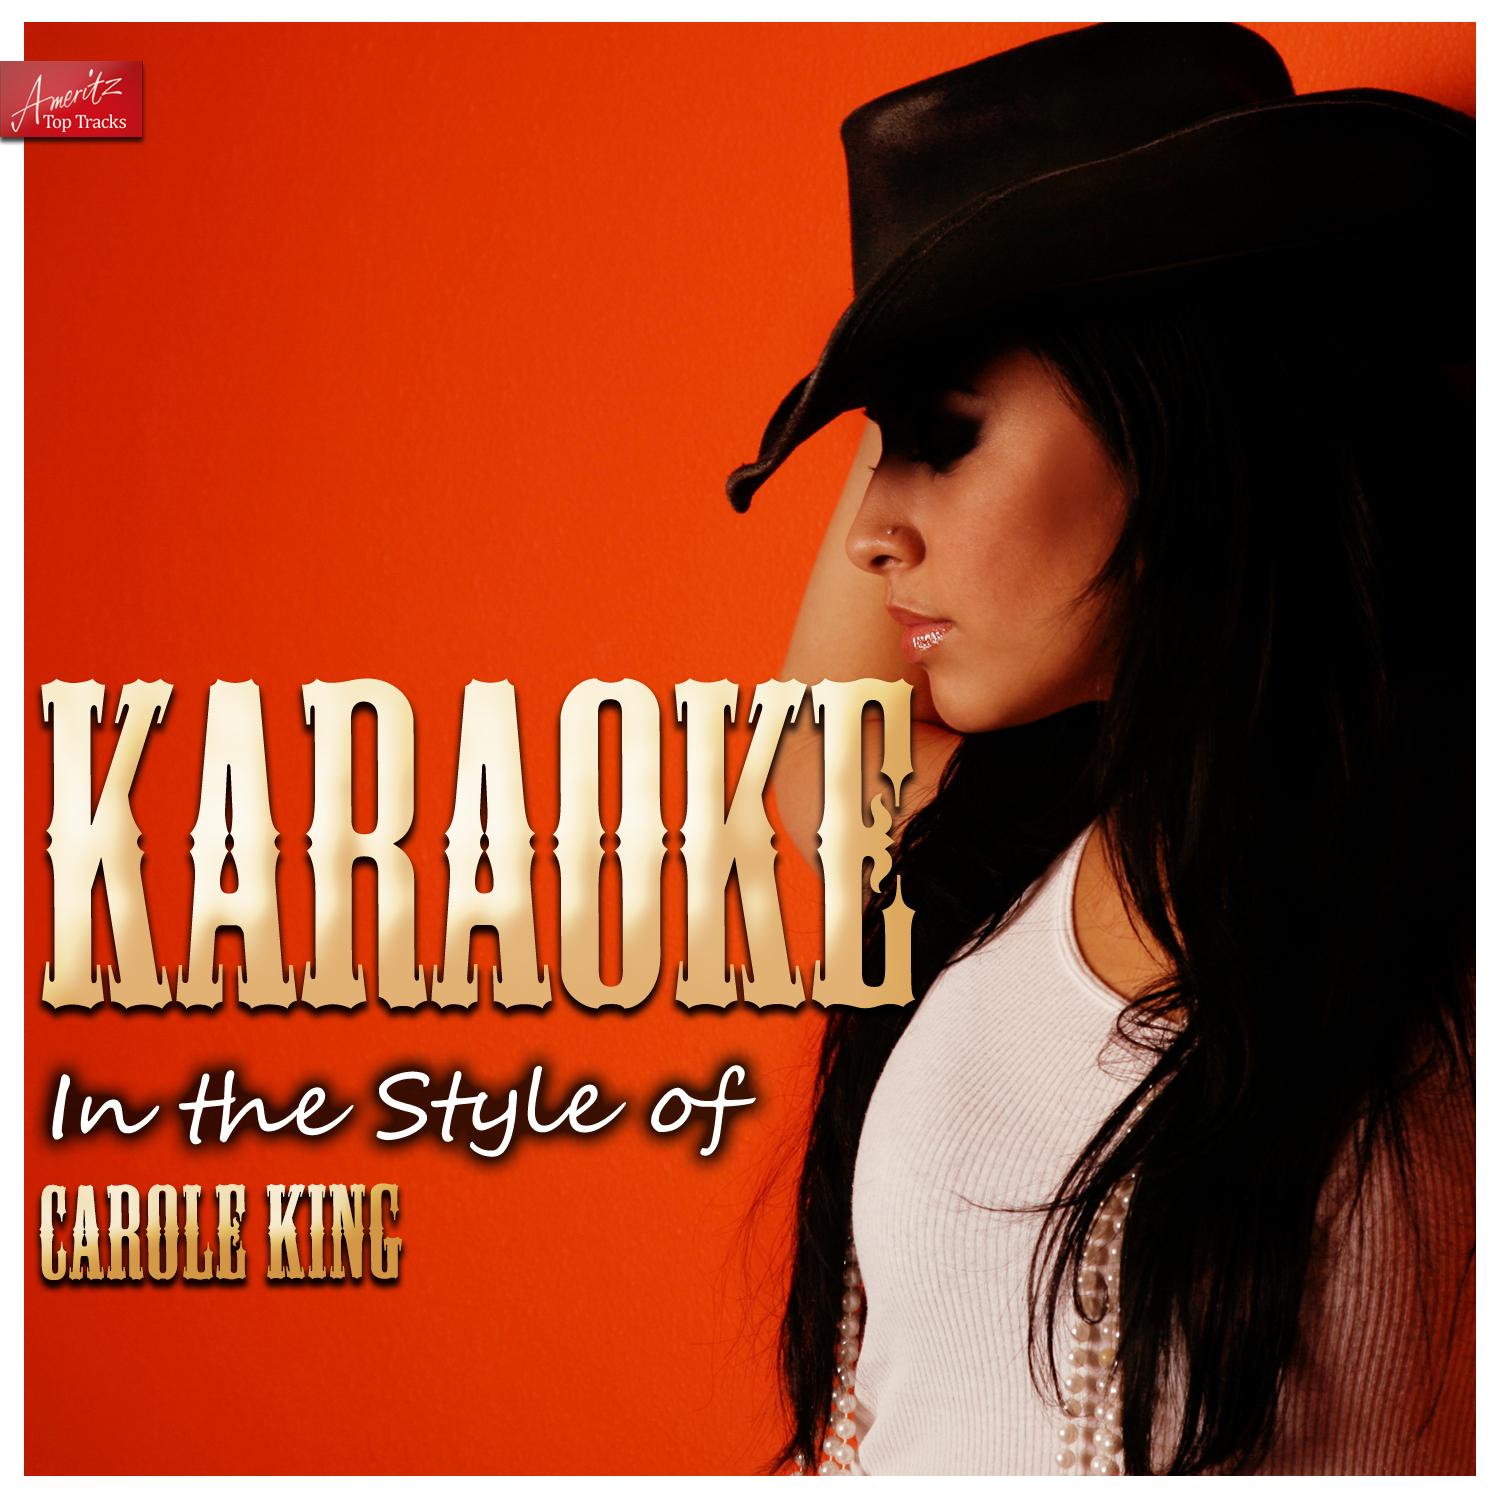 It Might As Well Rain Until September (In the Style of Carole King) [Karaoke Version]